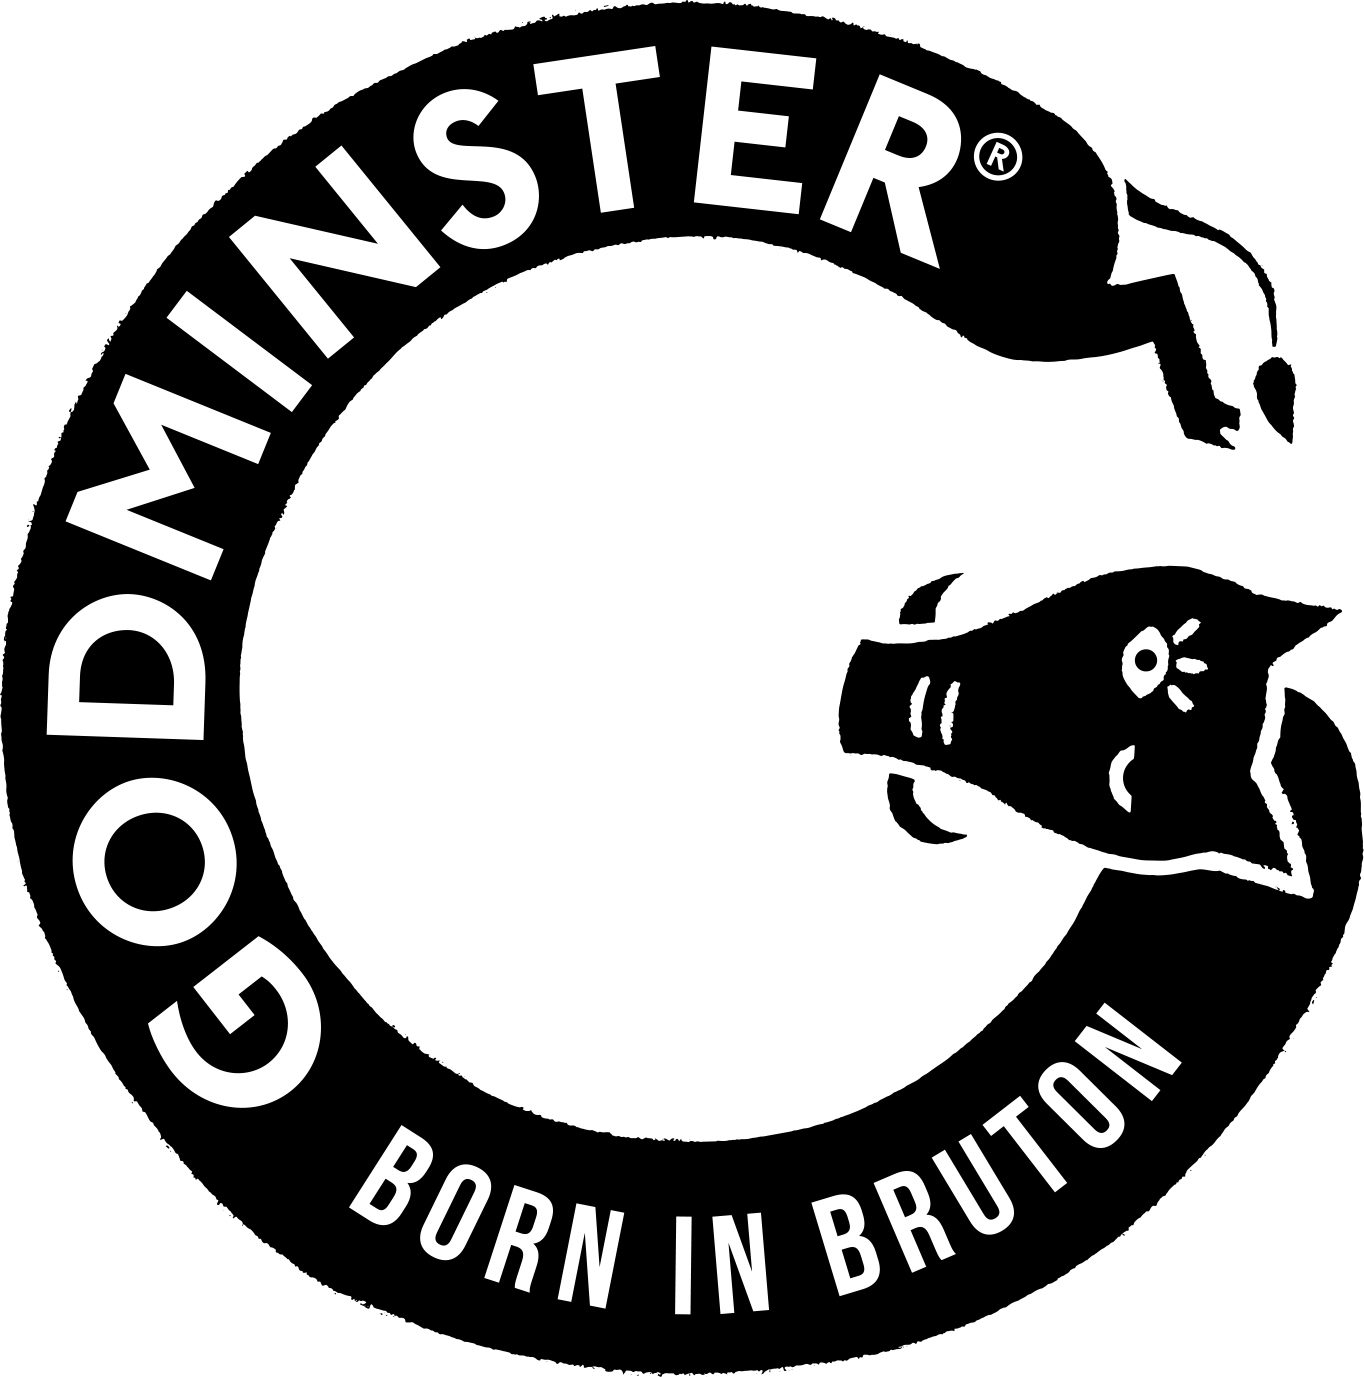 Godminster Cheese